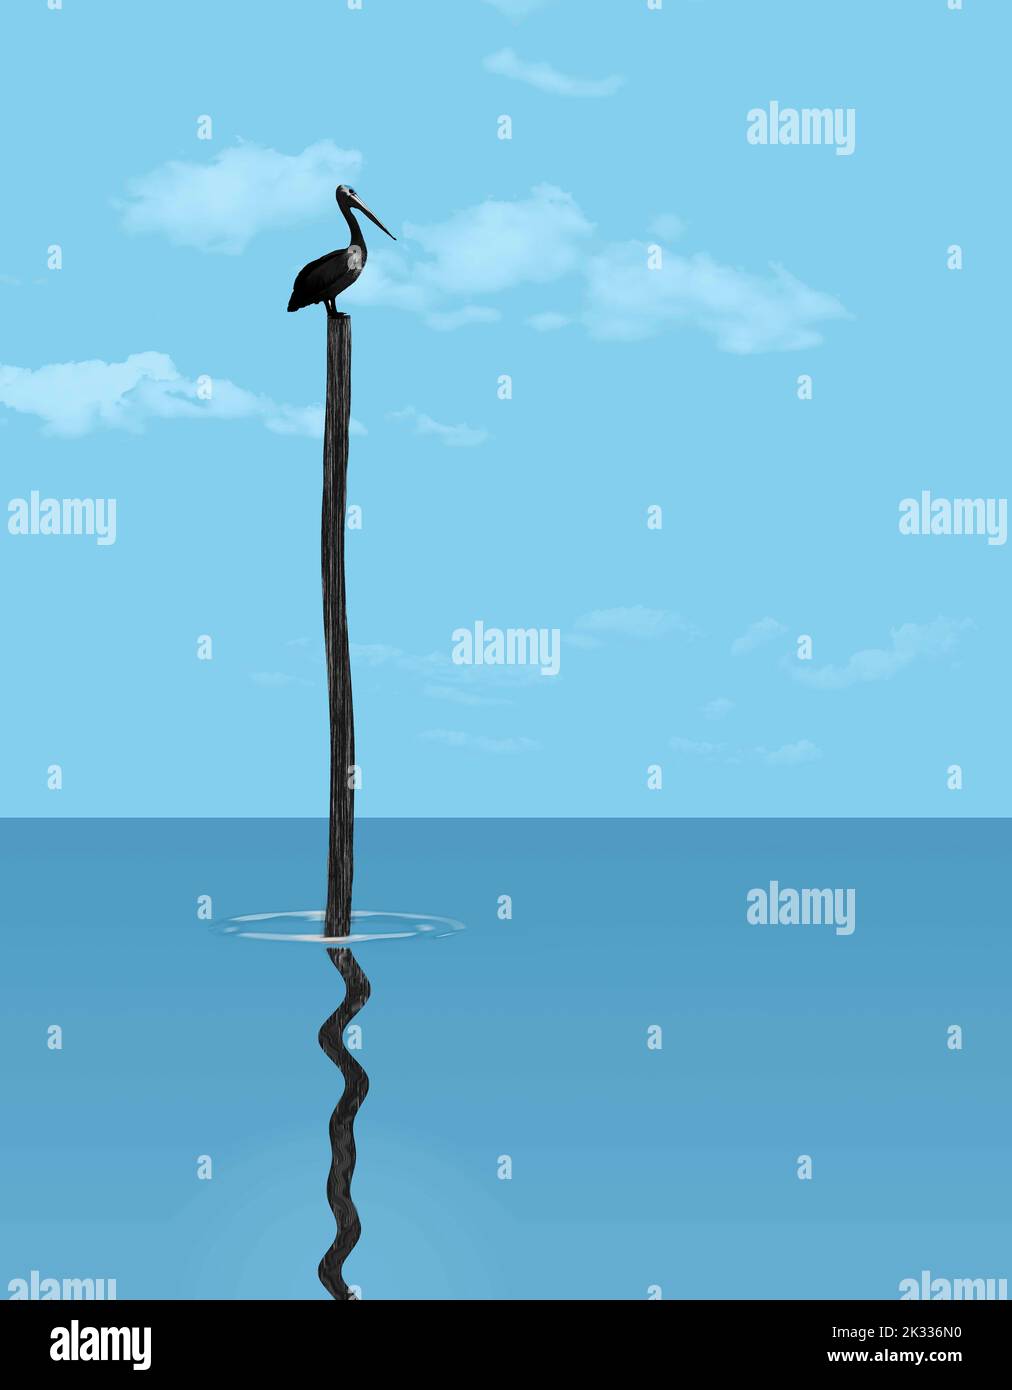 A lone brown pelican rests and perches on top of a tall wooden piling sticking up from the ocean surface in this 3-d illustration. Stock Photo